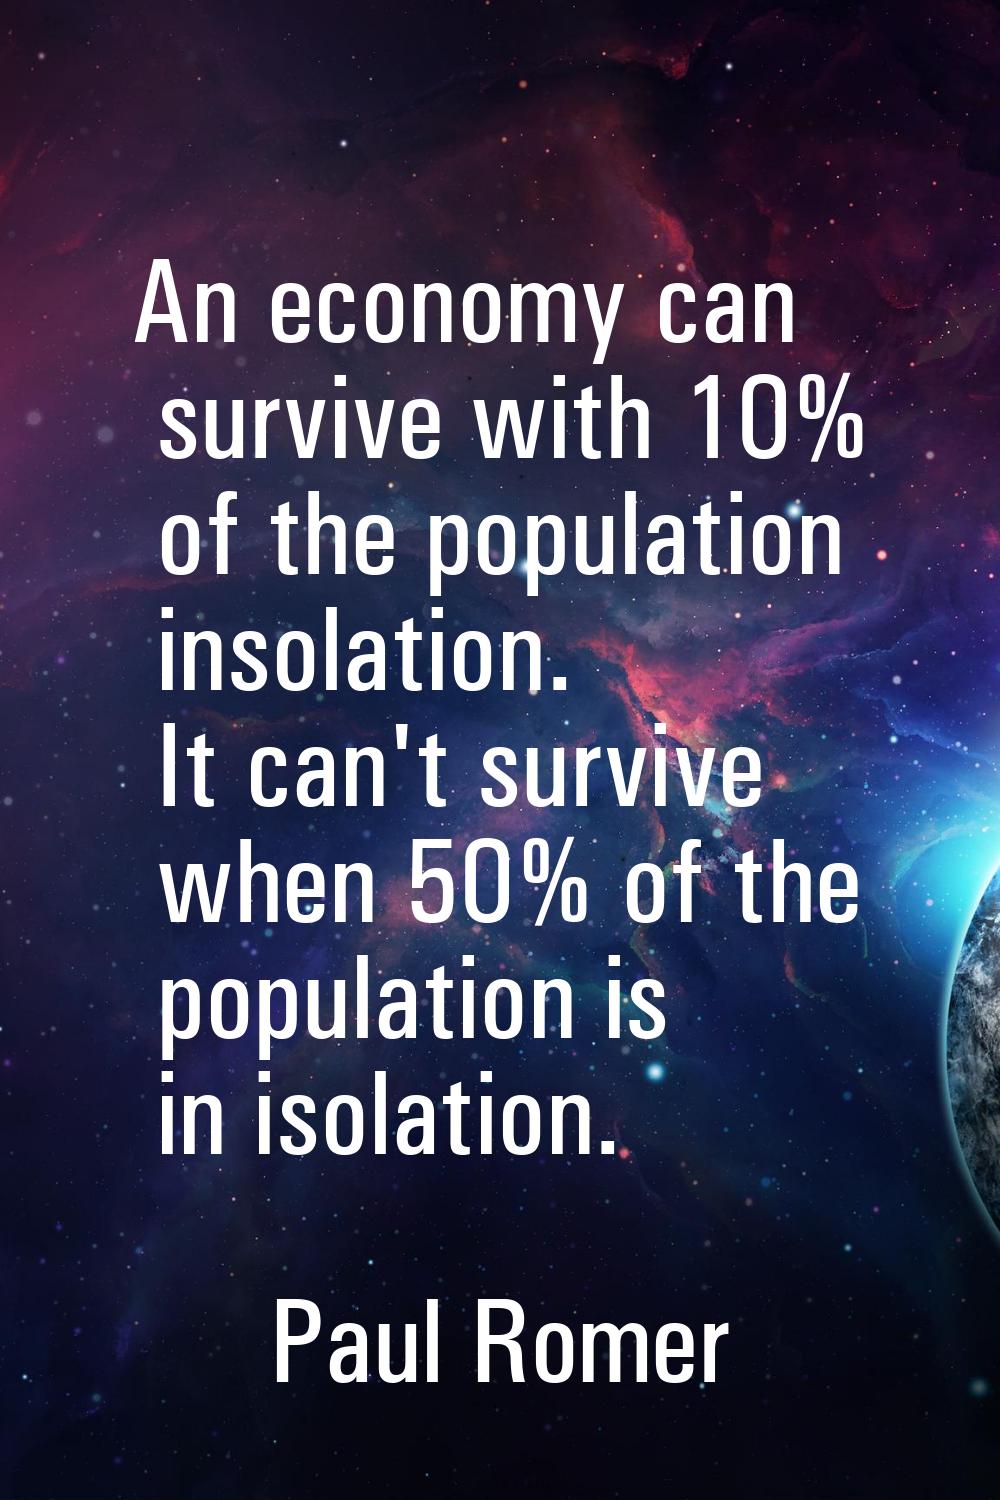 An economy can survive with 10% of the population insolation. It can't survive when 50% of the popu